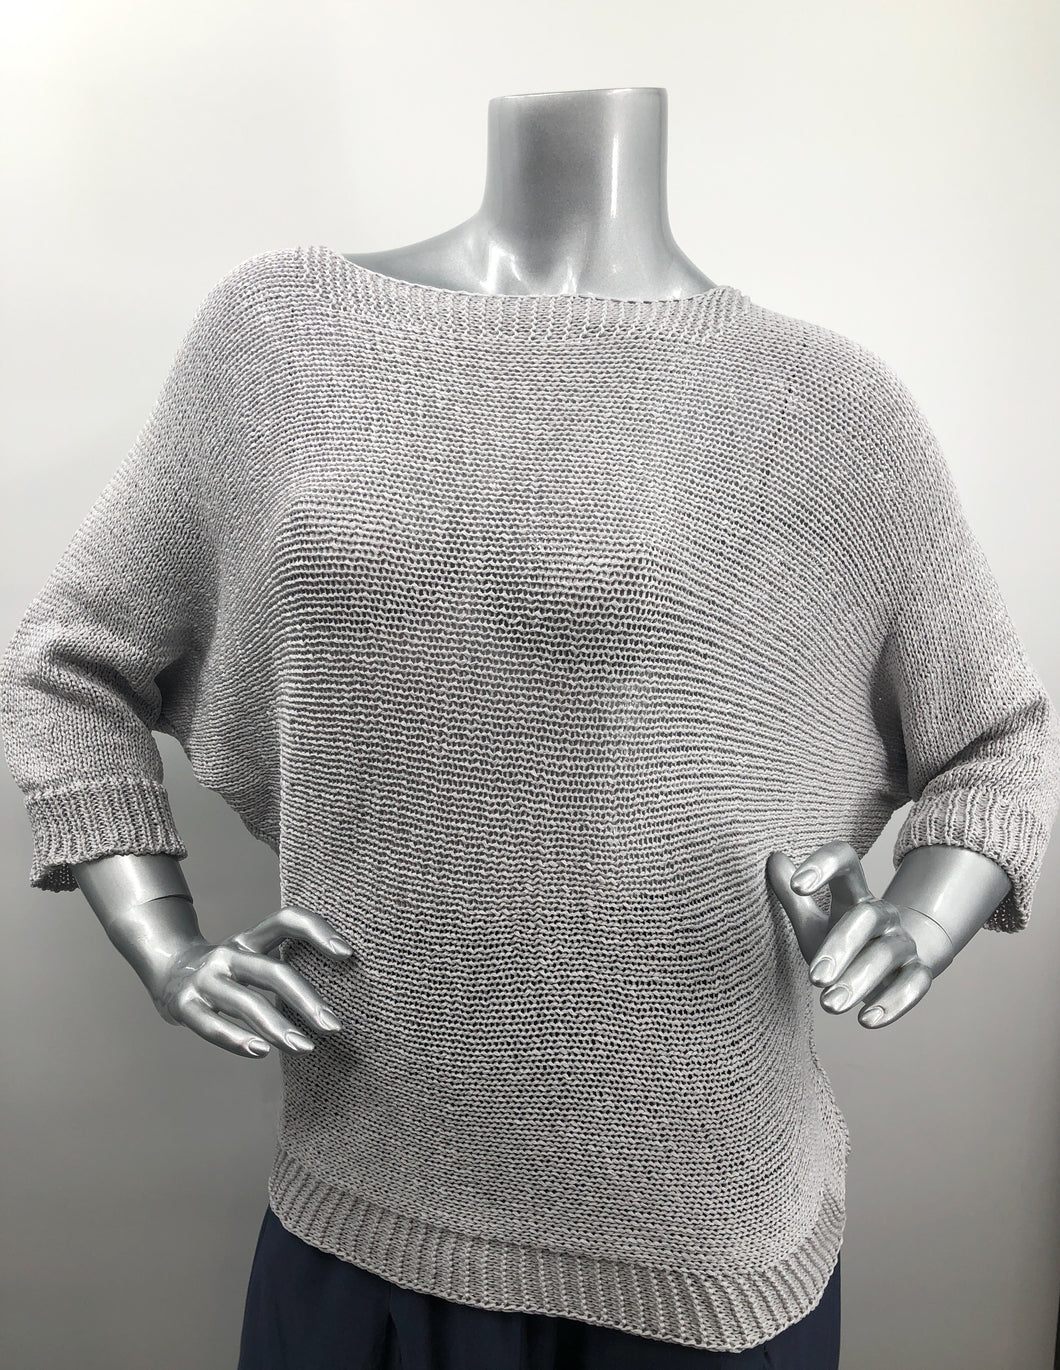 A perfect sweater for all year round, as it is not too heavy and not too light, this knit sweater is fashionable and functional.  The silver-gray color is so on trend and literally goes with so many different bottoms.  As this 3/4 sleeve sweater is not a tight knit, it is slightly see-through.  Wear over a bralette, tank or nude bra if preferred.  